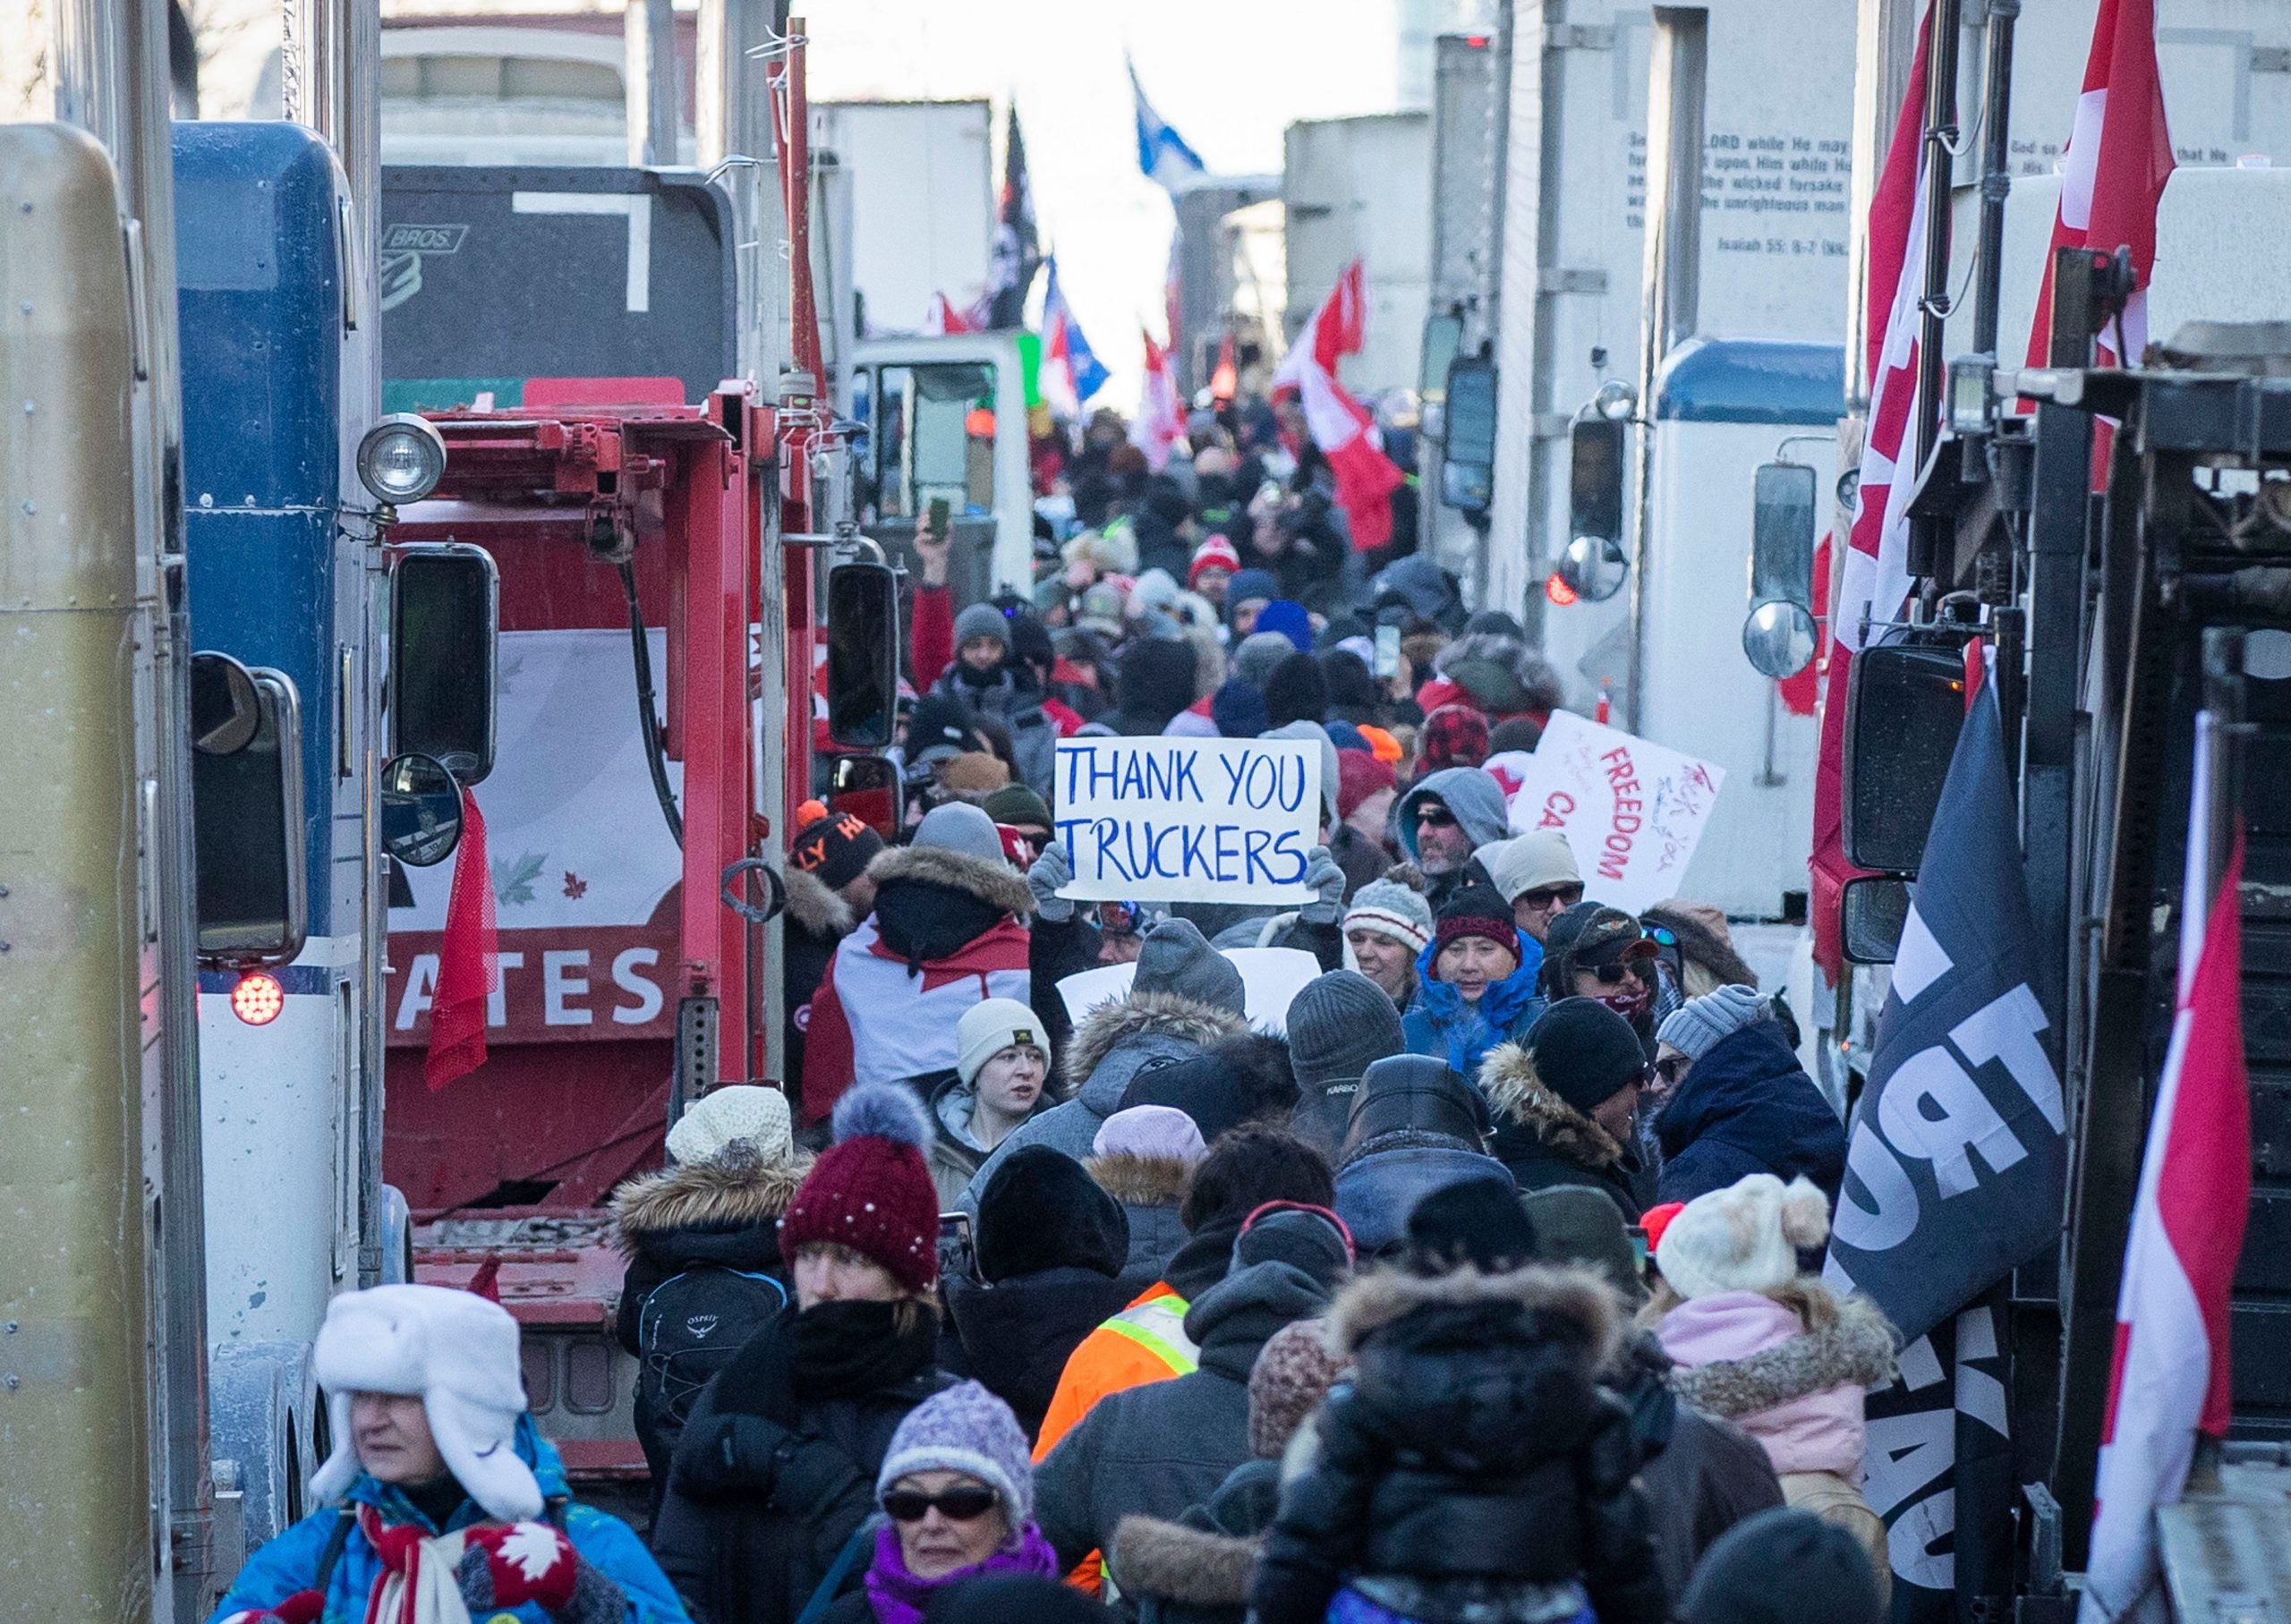 Supporters arrive at Parliament Hill for the Freedom Truck Convoy to protest against Covid-19 vaccine mandates and restrictions in Ottawa, Canada, on January 29, 2022